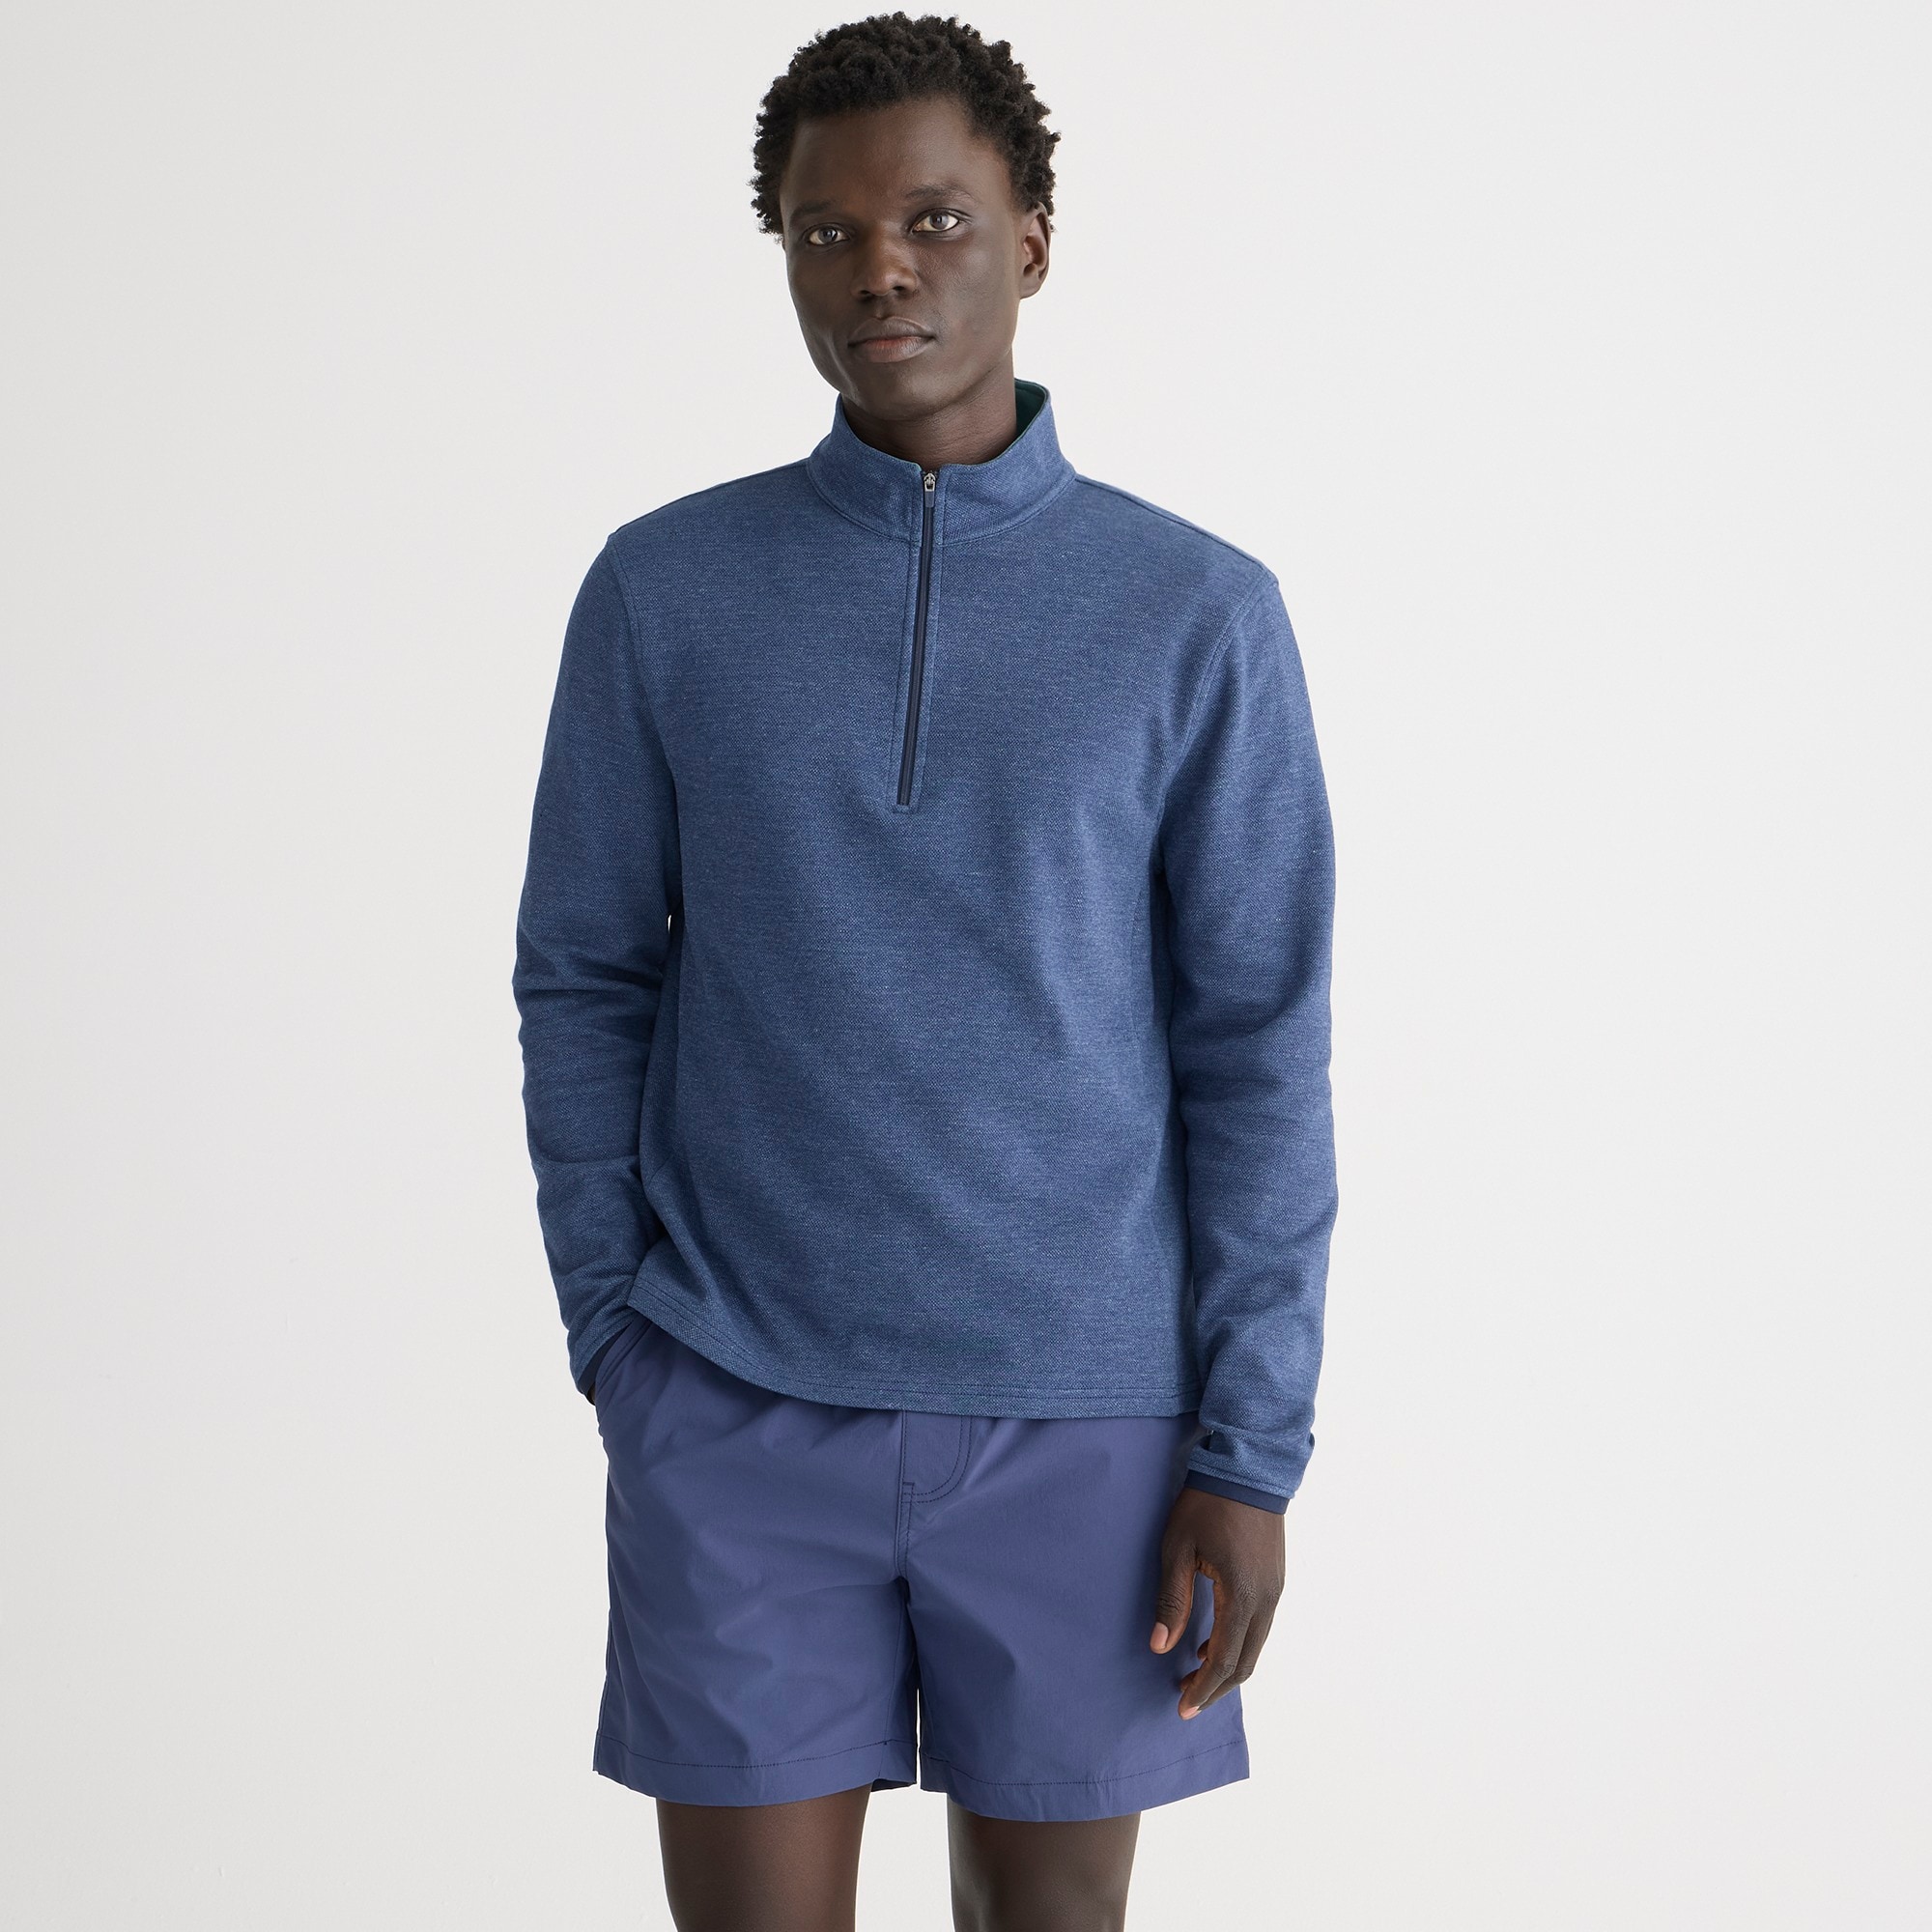 mens Performance half-zip pullover with COOLMAX&reg; technology